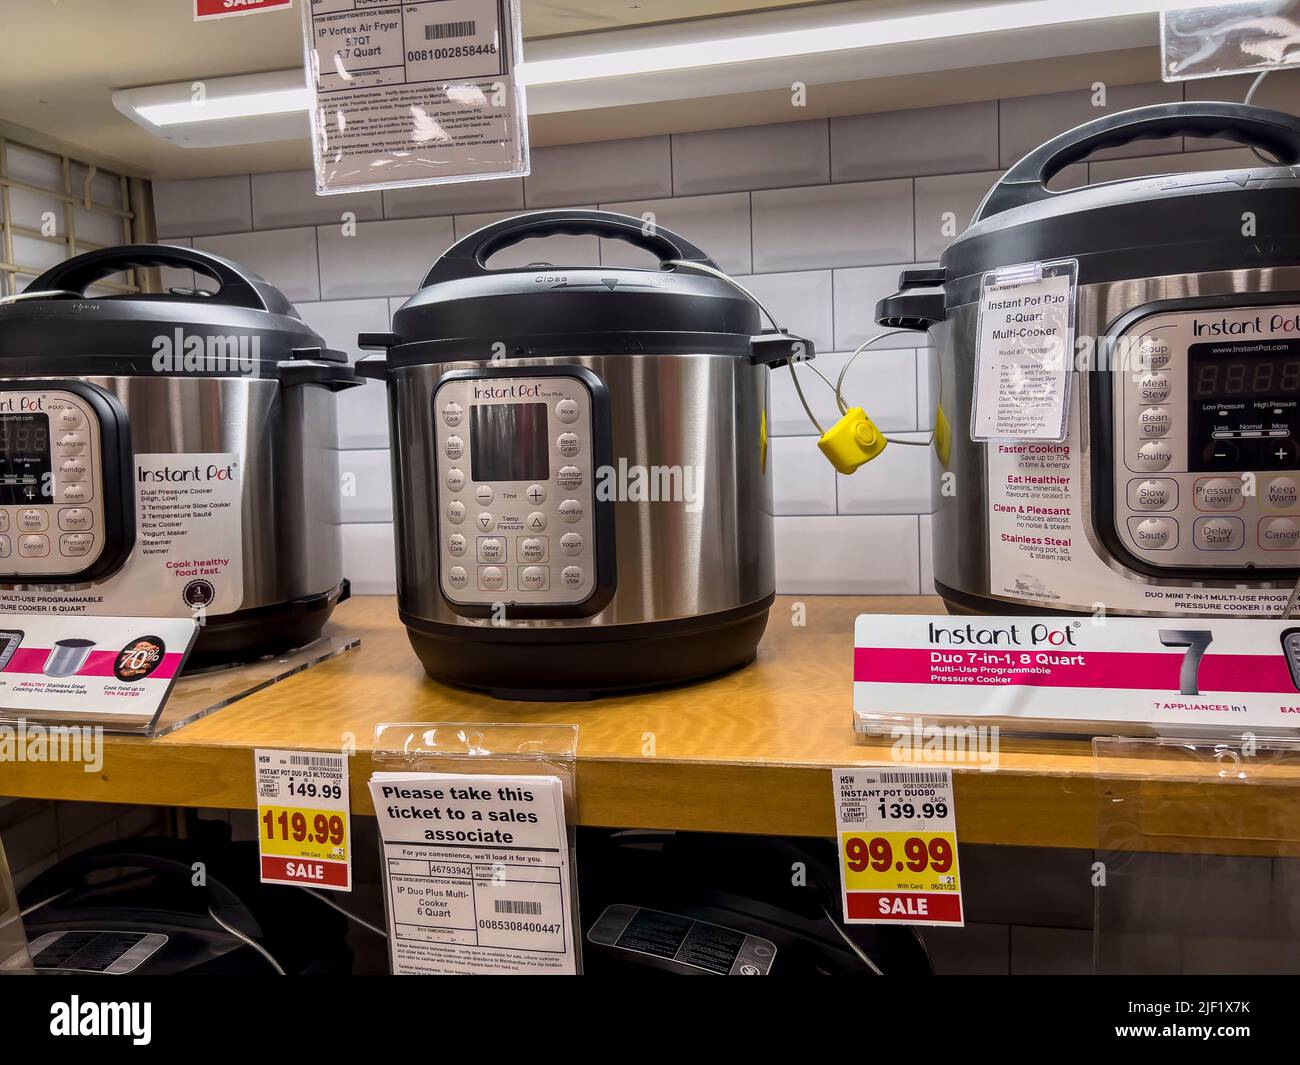 https://c8.alamy.com/comp/2JF1X7K/everett-wa-usa-circa-june-2022-angled-close-up-of-instant-pots-for-sale-inside-a-fred-meyer-grocery-store-2JF1X7K.jpg